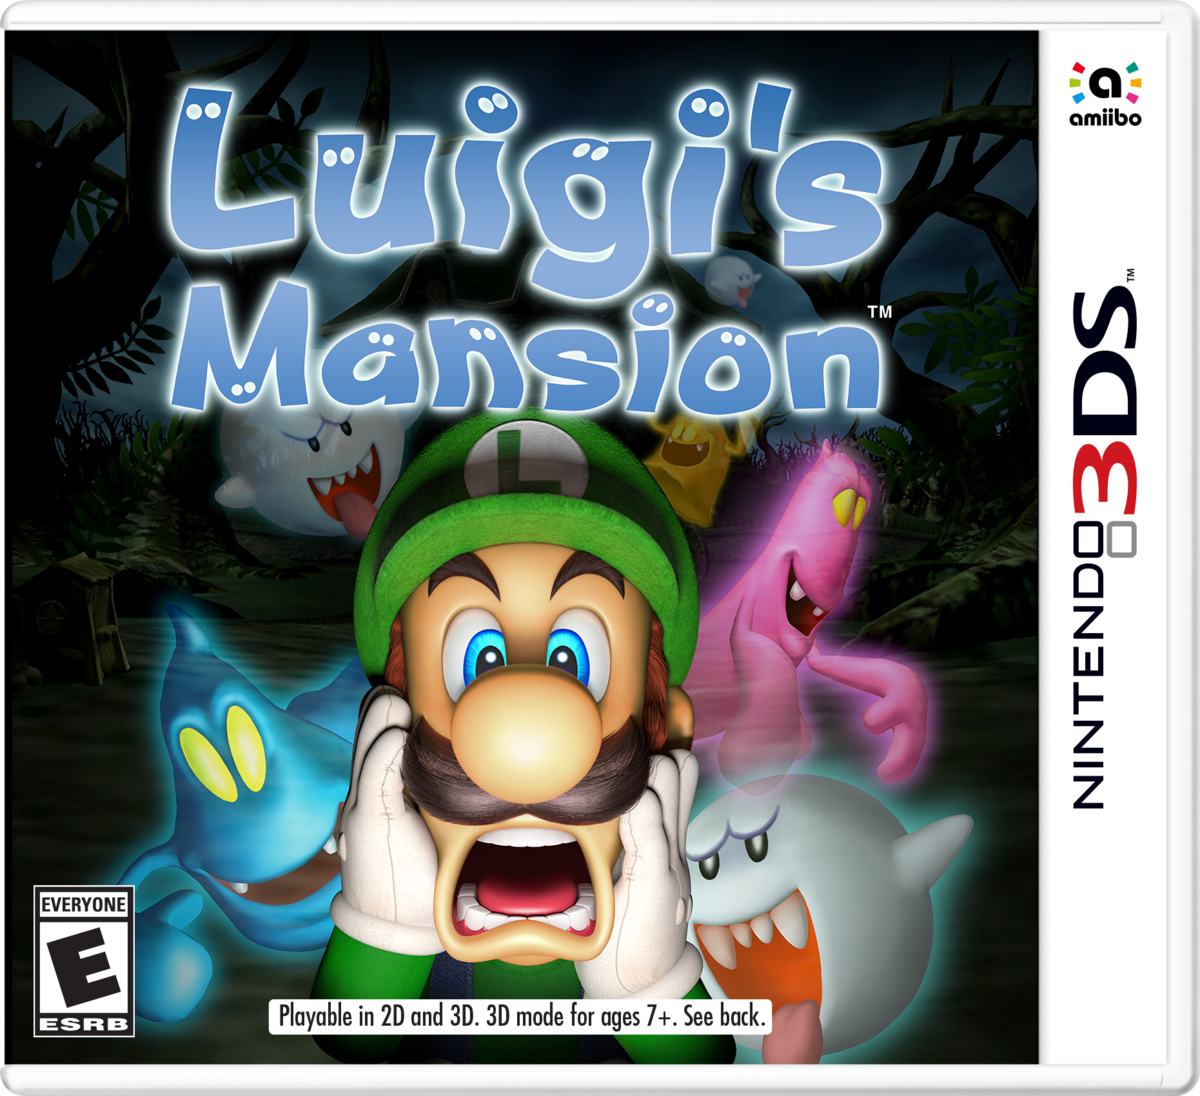 luigi-s-mansion-nintendo-3ds-strategywiki-the-video-game-walkthrough-and-strategy-guide-wiki